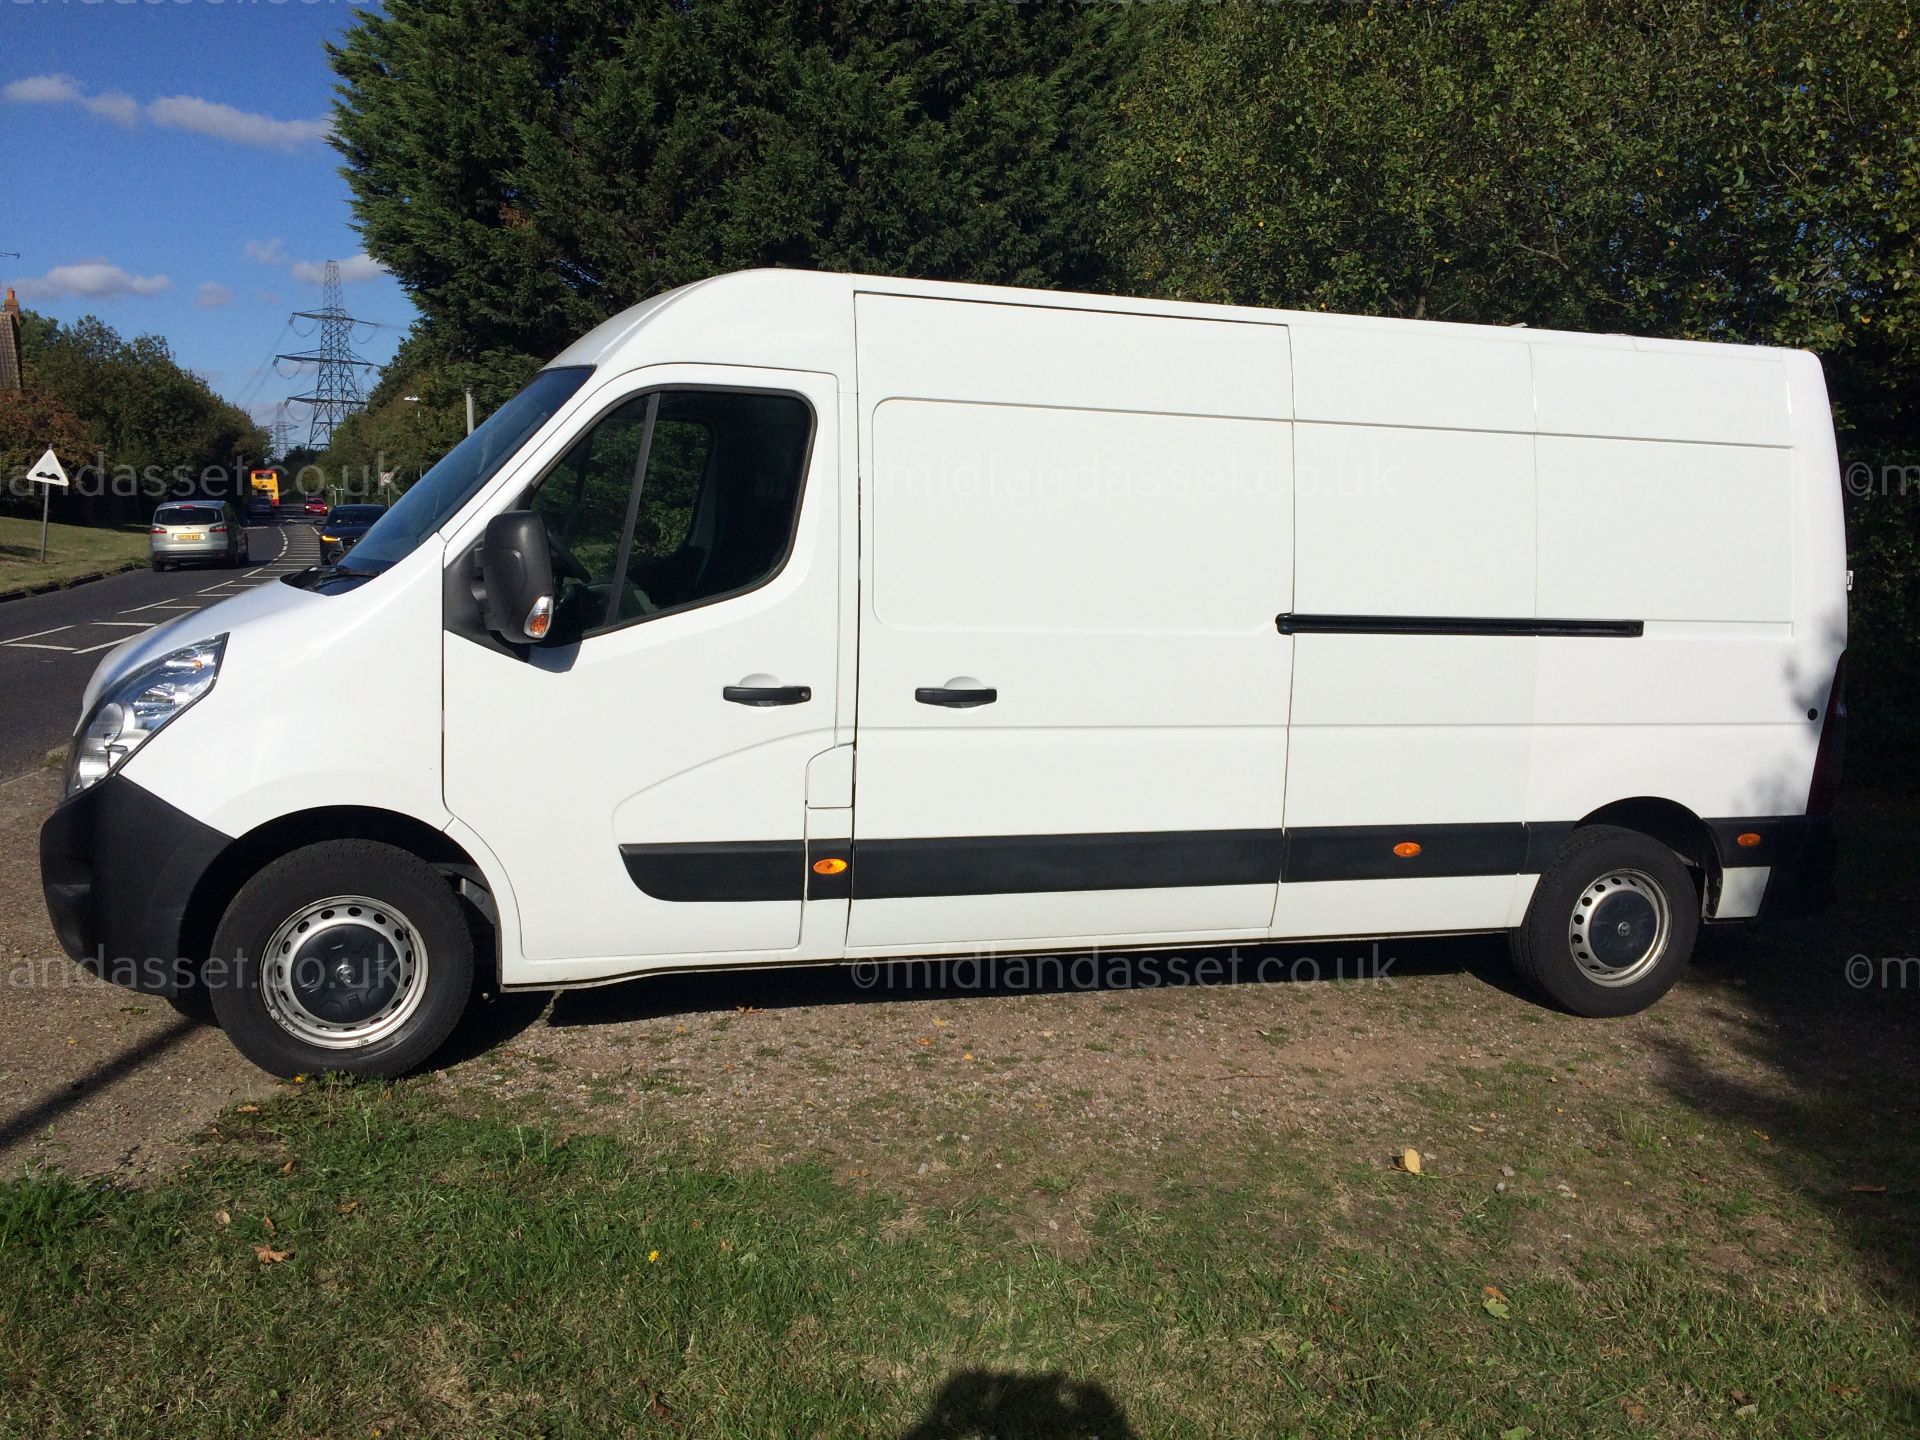 P - 2014/14 REG VAUXHALL MOVANO F3500 L3H2 CDTI 125 PANEL VAN ONE OWNER   DATE OF REGISTRATION: 17th - Image 3 of 5